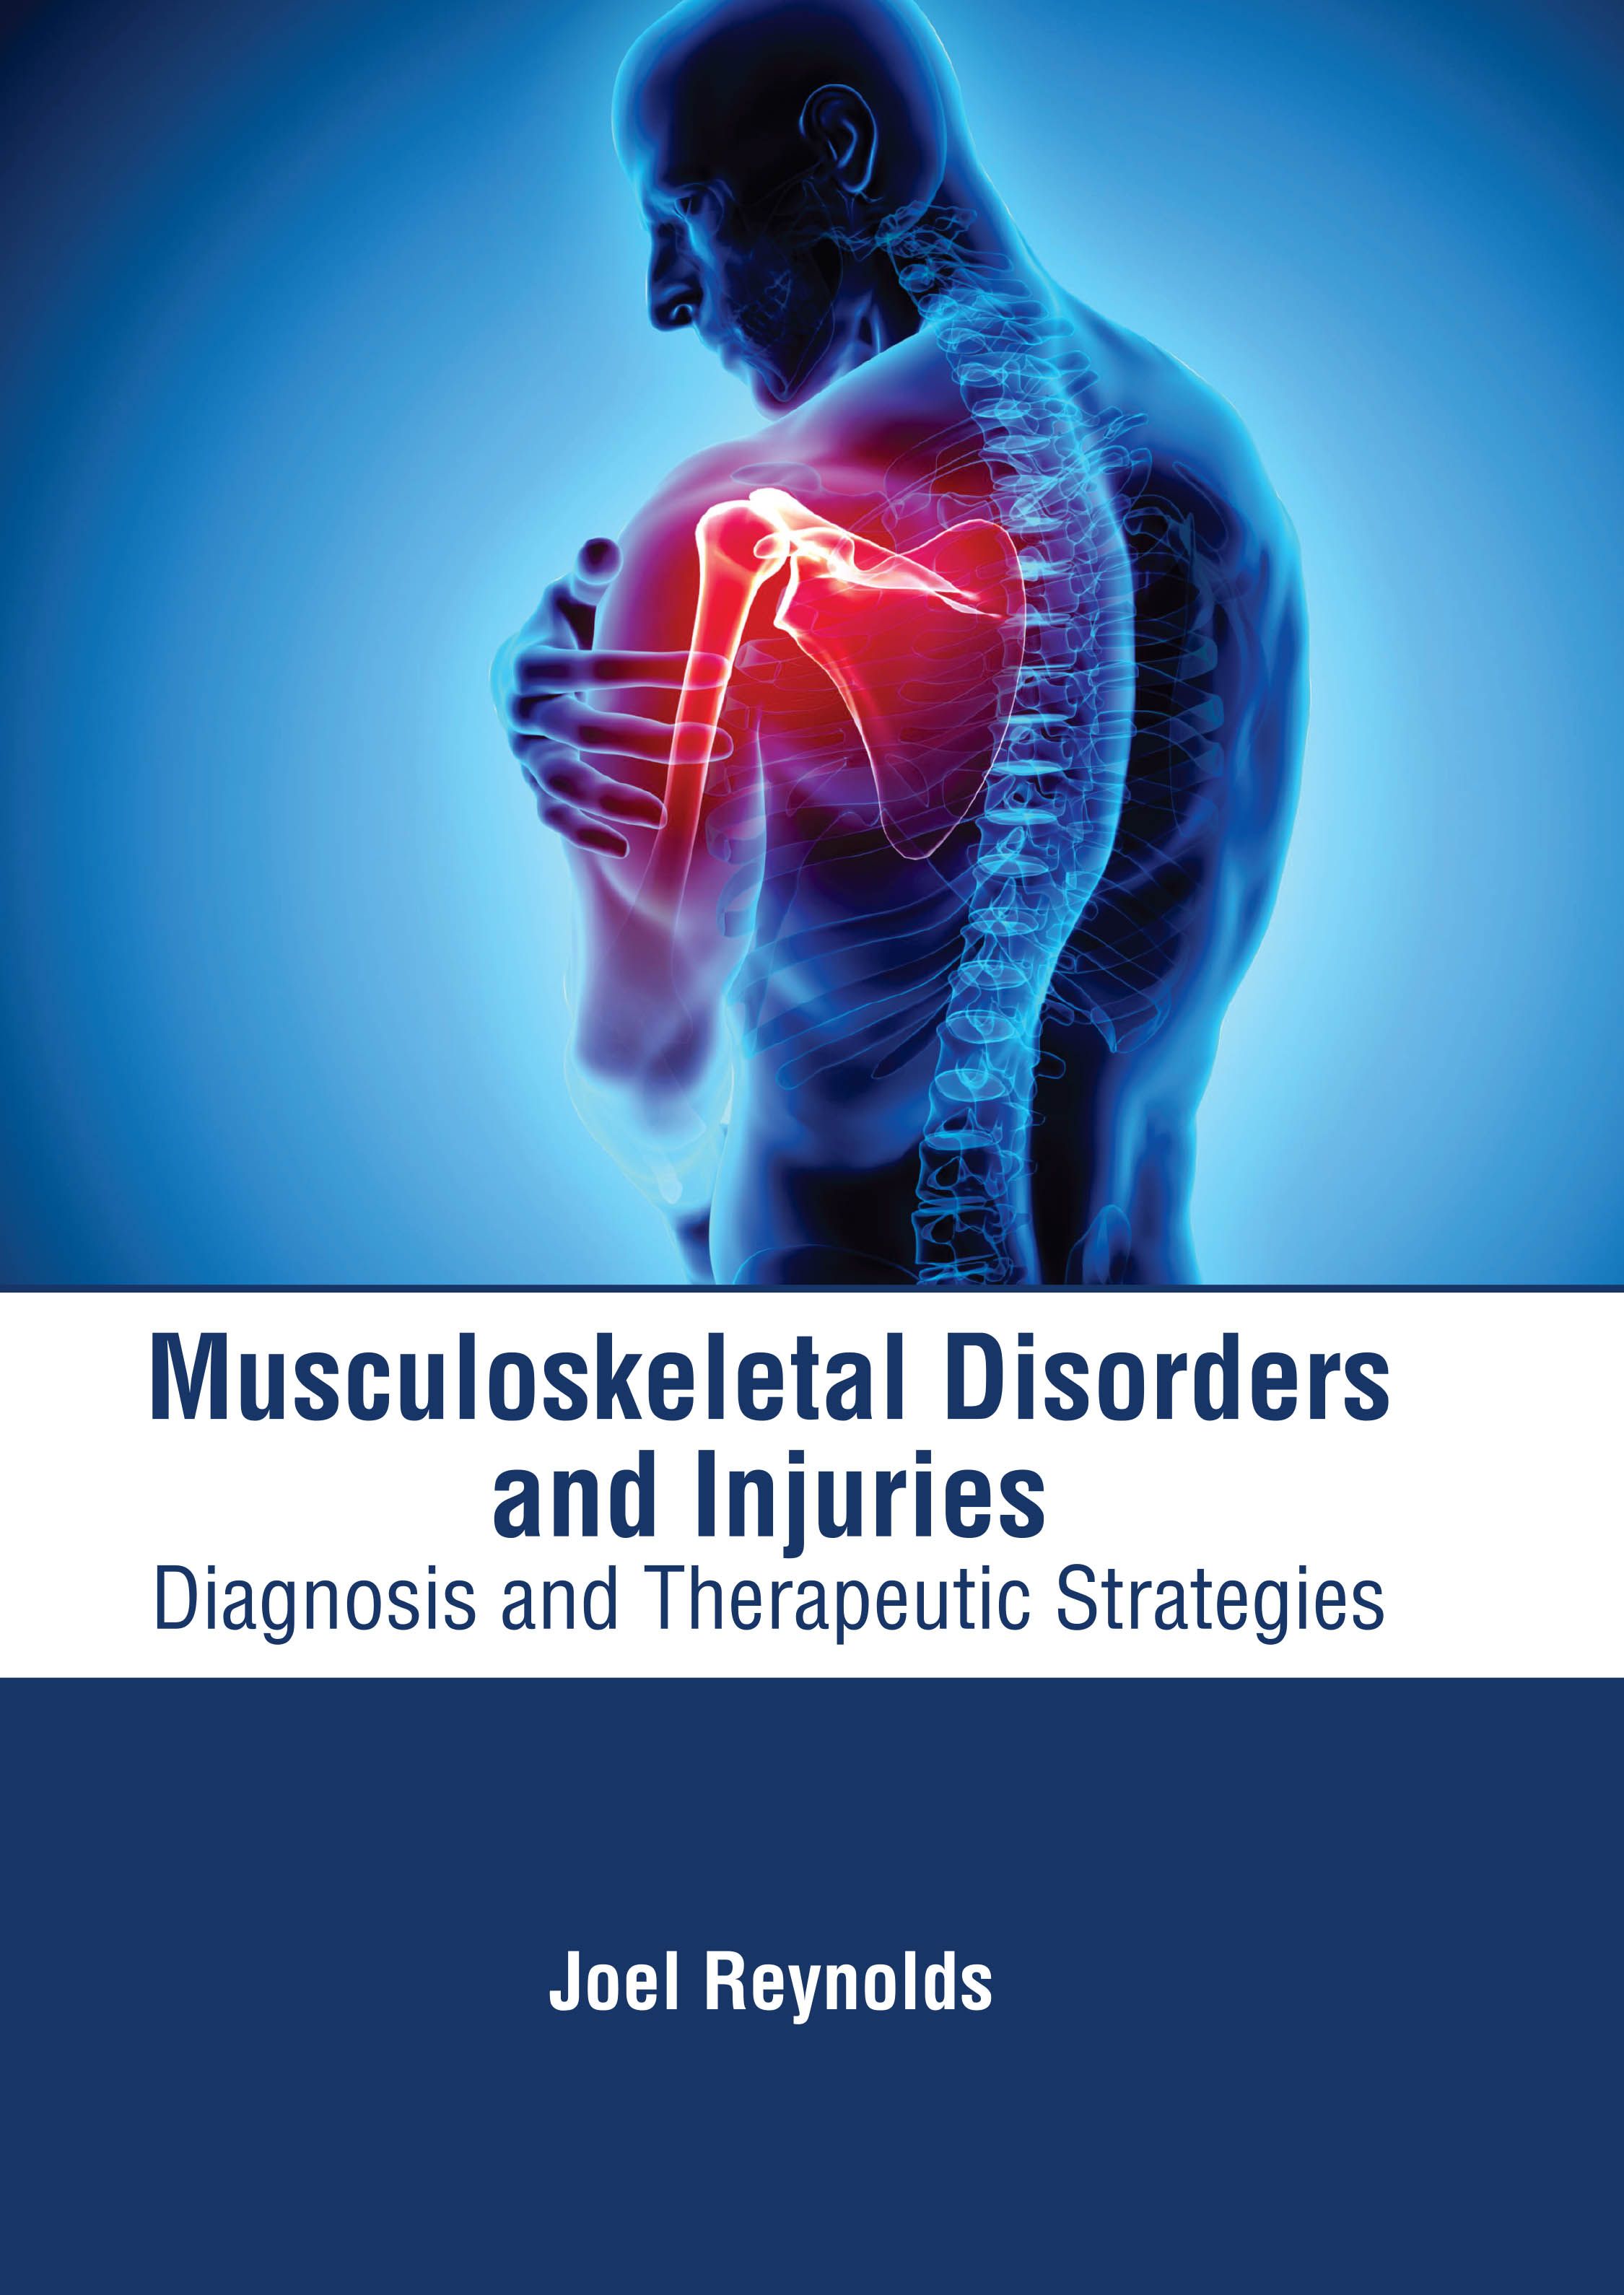 

exclusive-publishers/american-medical-publishers/musculoskeletal-disorders-and-injuries-diagnosis-and-therapeutic-strategies-9781639274000